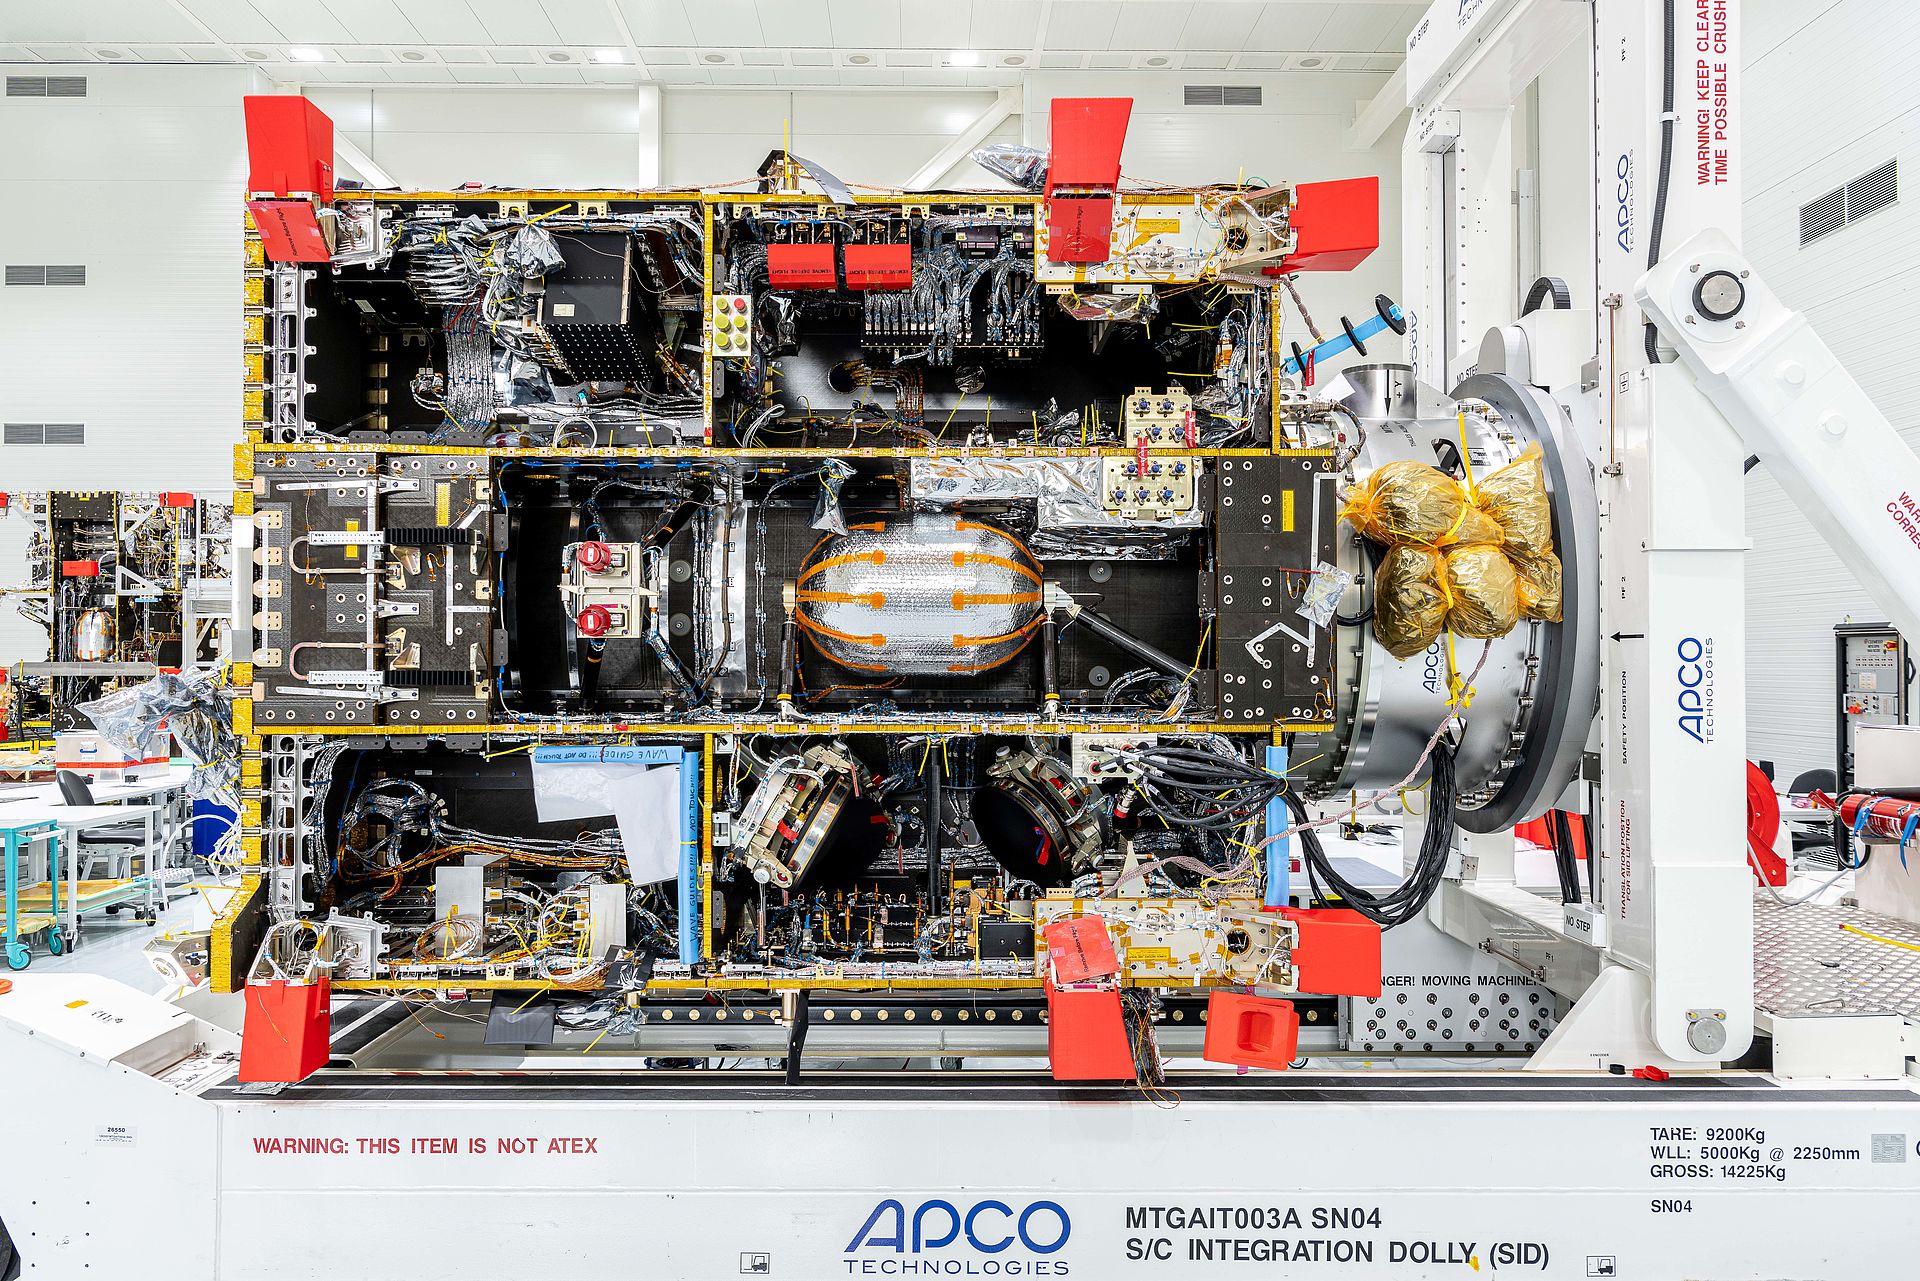 5 Questions and Answers about the MTG - Meteosat Third Generation weather satellite programme